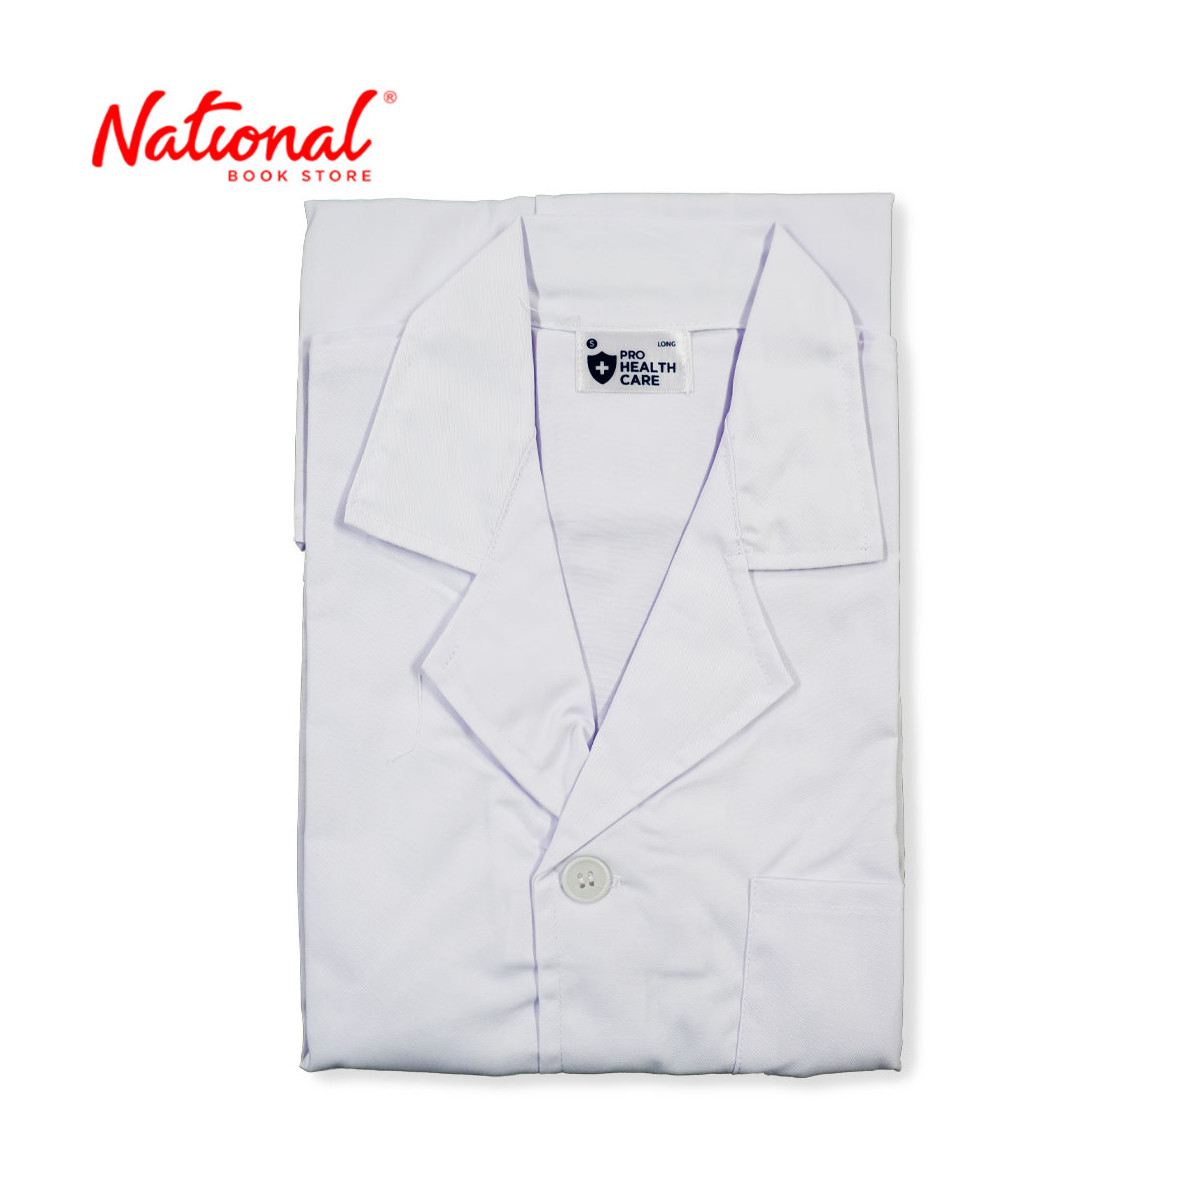 Prohealthcare Laboratory Gown Long Sleeve - School & Office Supplies